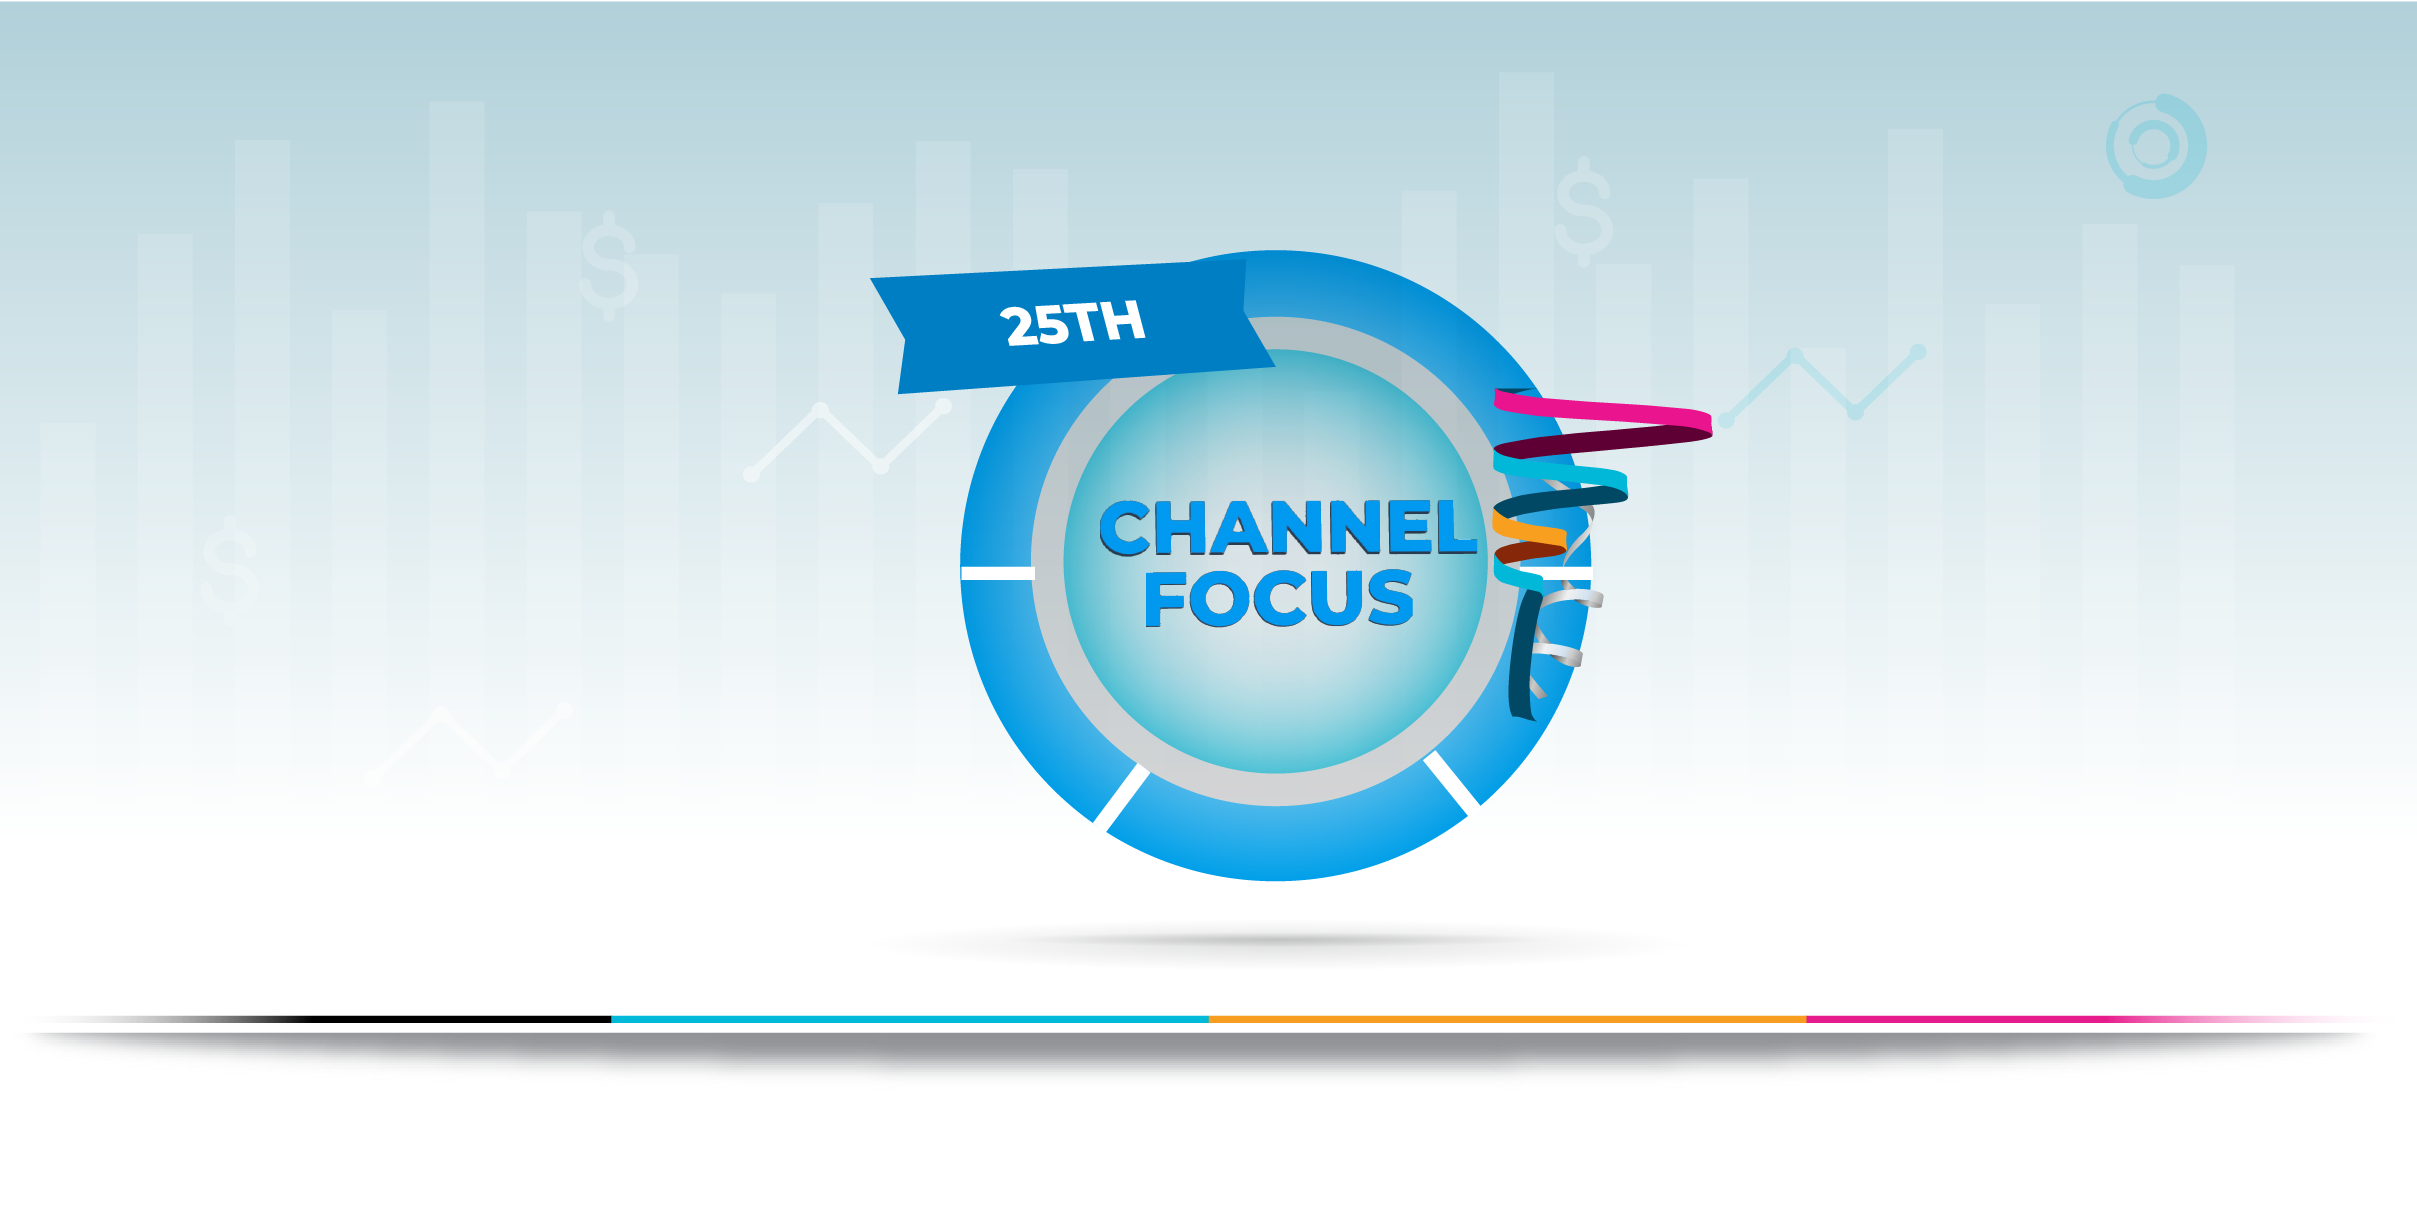 Takeaways from Channel Focus 25th Anniversary Conference